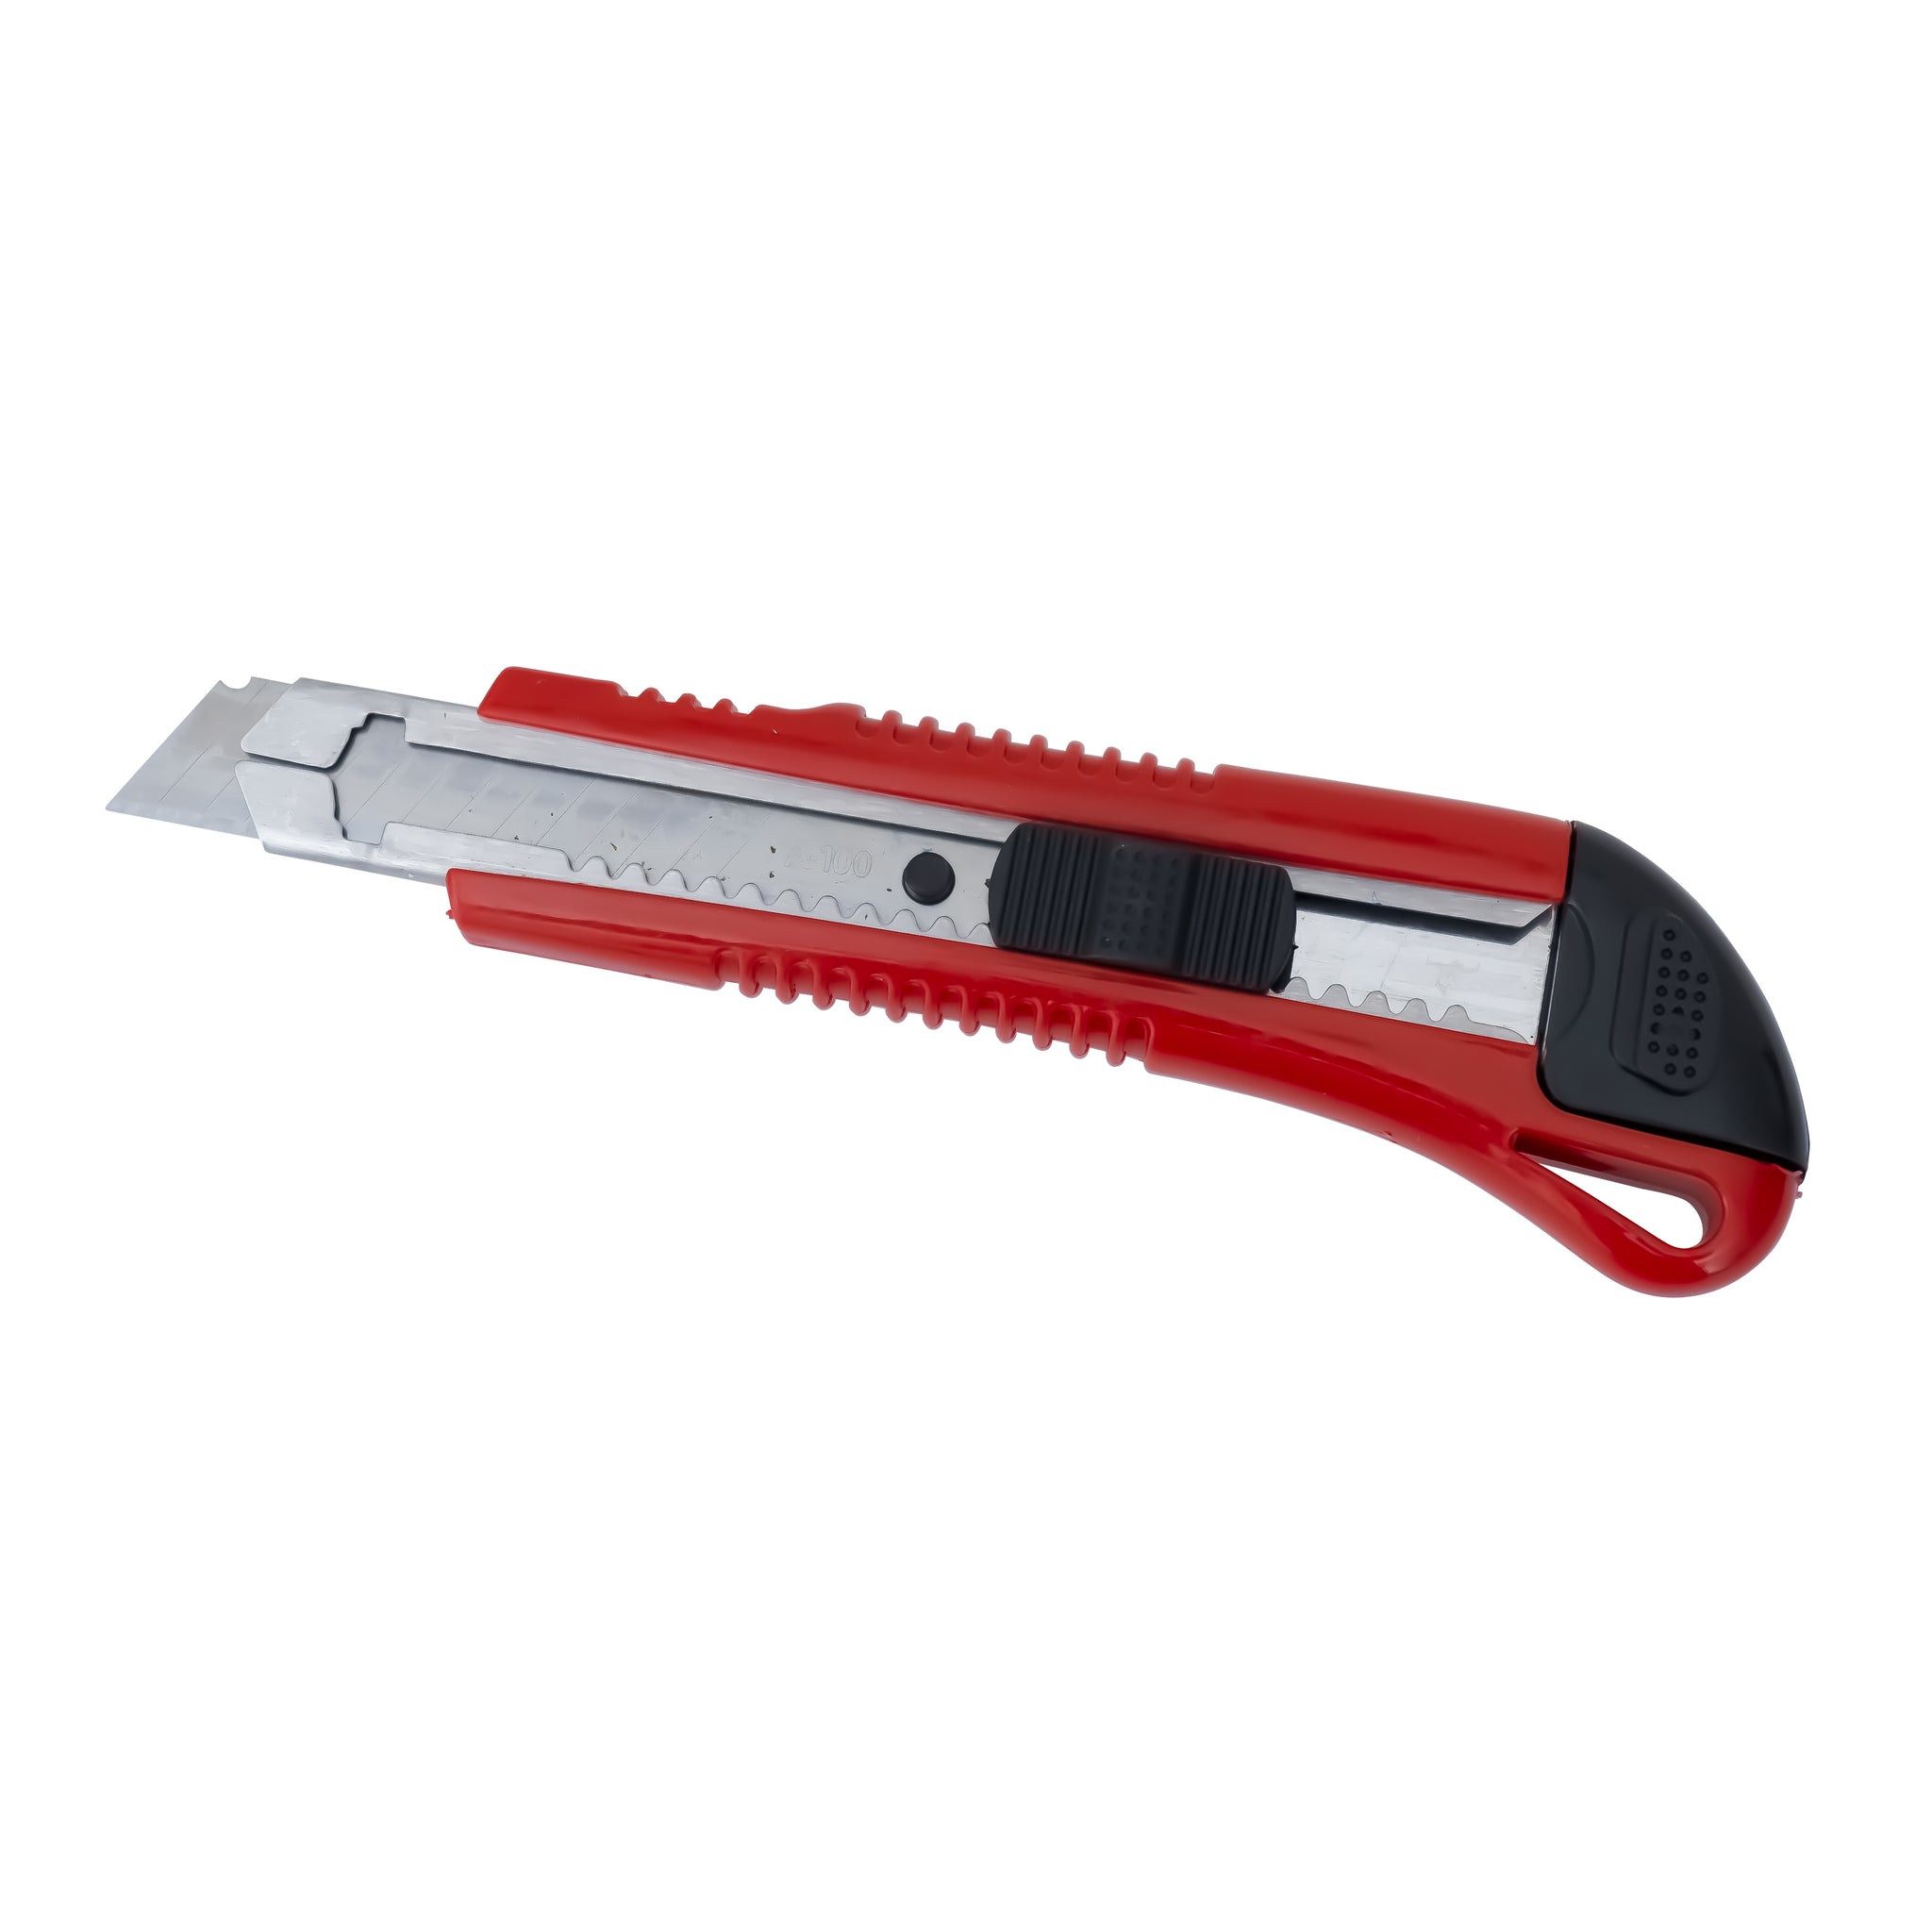 Plastic Utility Knife/Box Cutter w/Snap-off Blade (5)